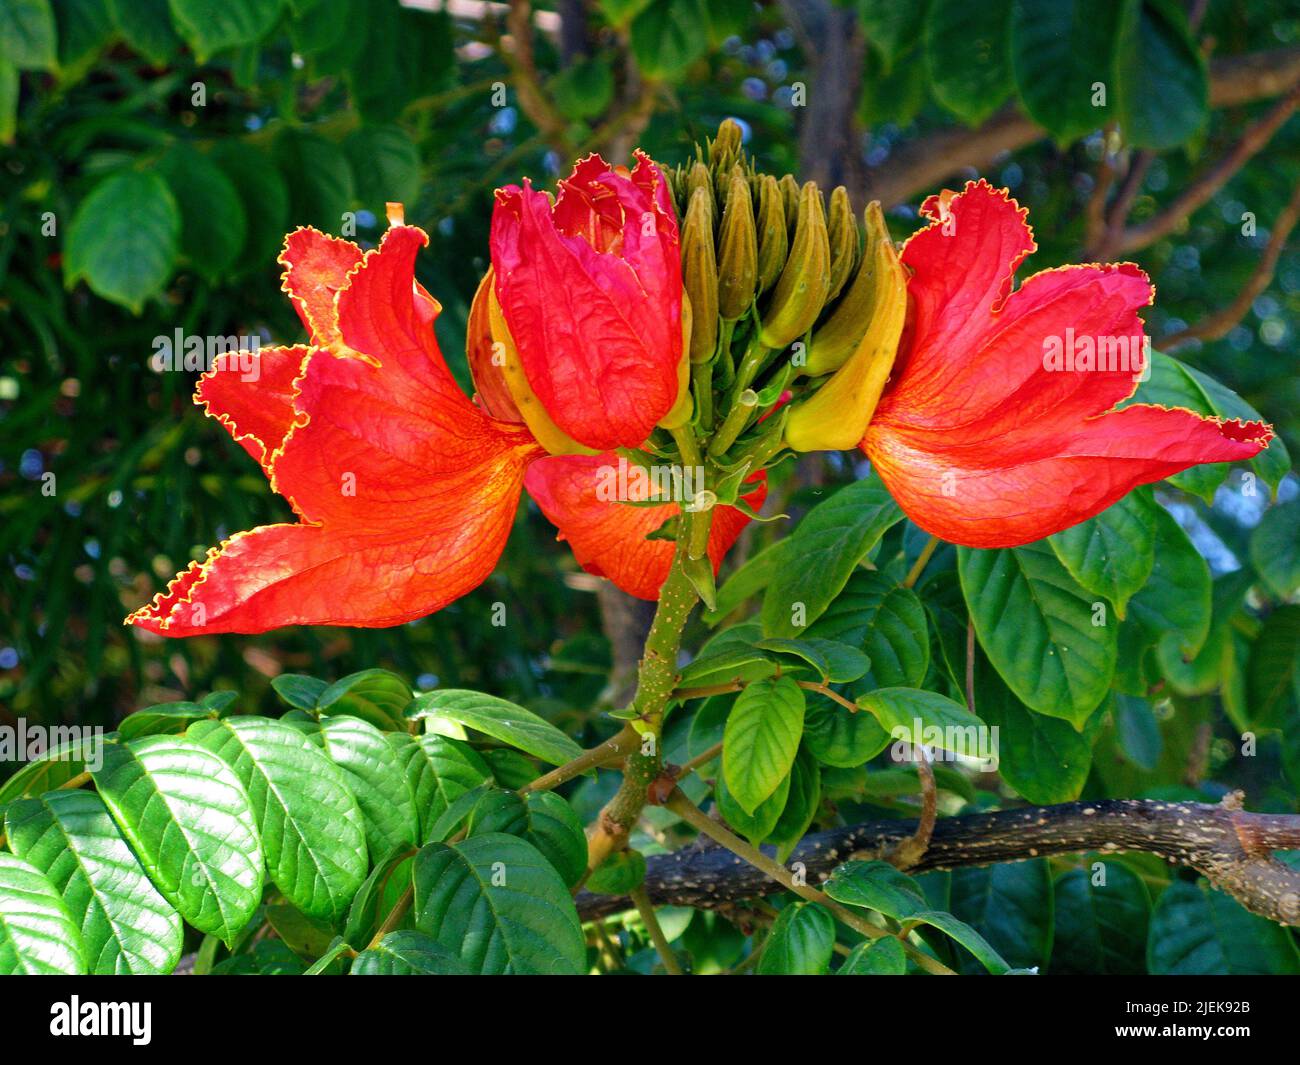 Blossoms of a Flamboyant, Flame Tree (Delonix regia), Puerto Rico, Grand Canary, Canary islands, Spain, Europe Stock Photo